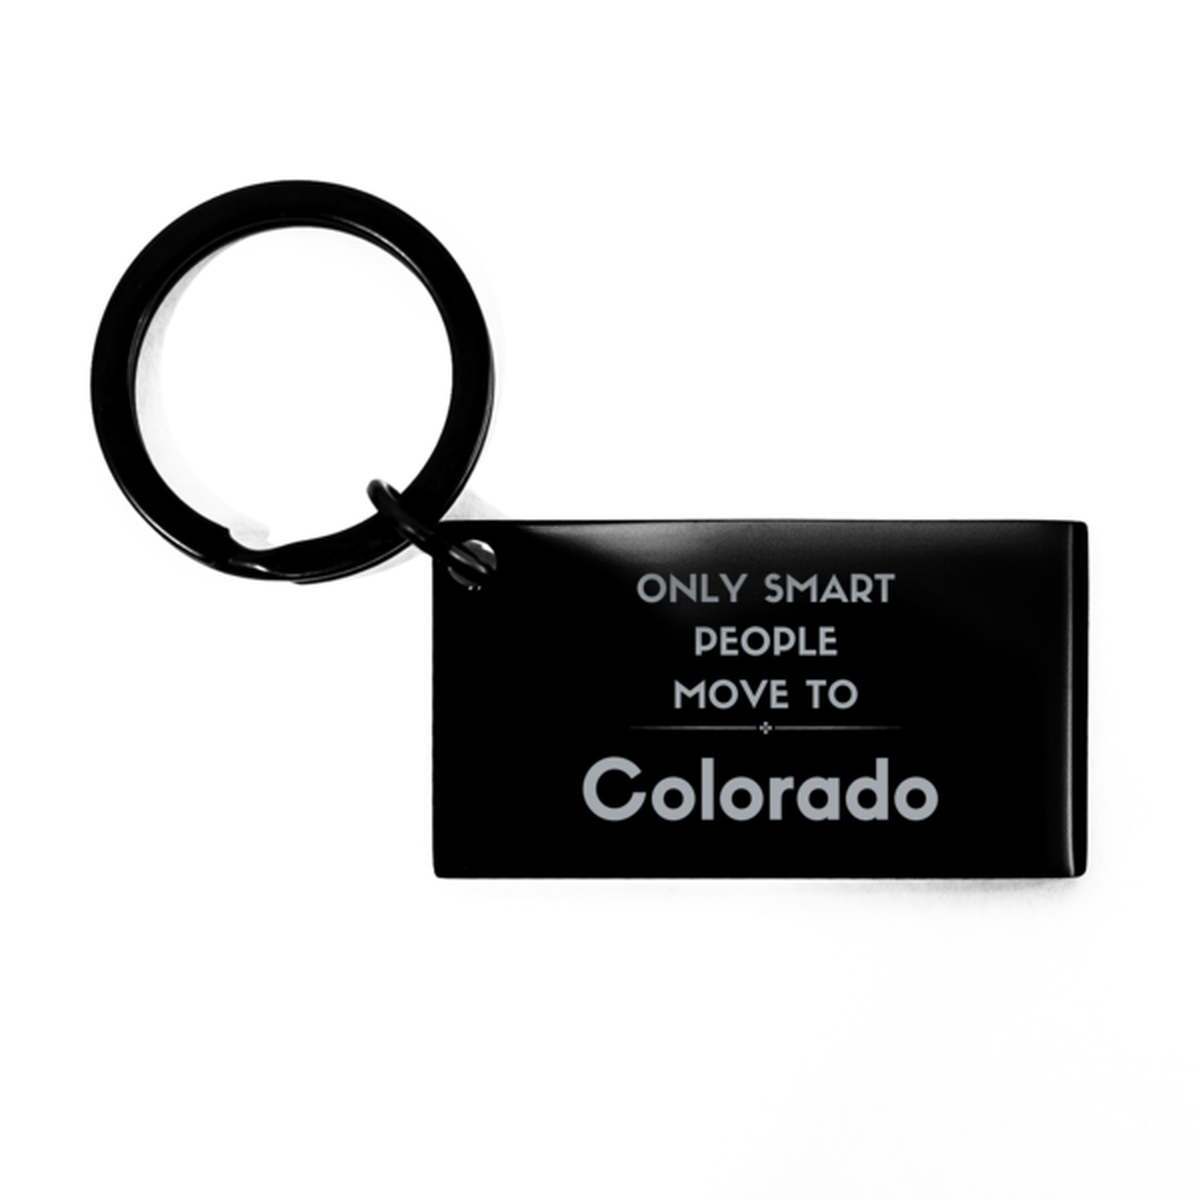 Only smart people move to Colorado Keychain, Gag Gifts For Colorado, Move to Colorado Gifts for Friends Coworker Funny Saying Quote